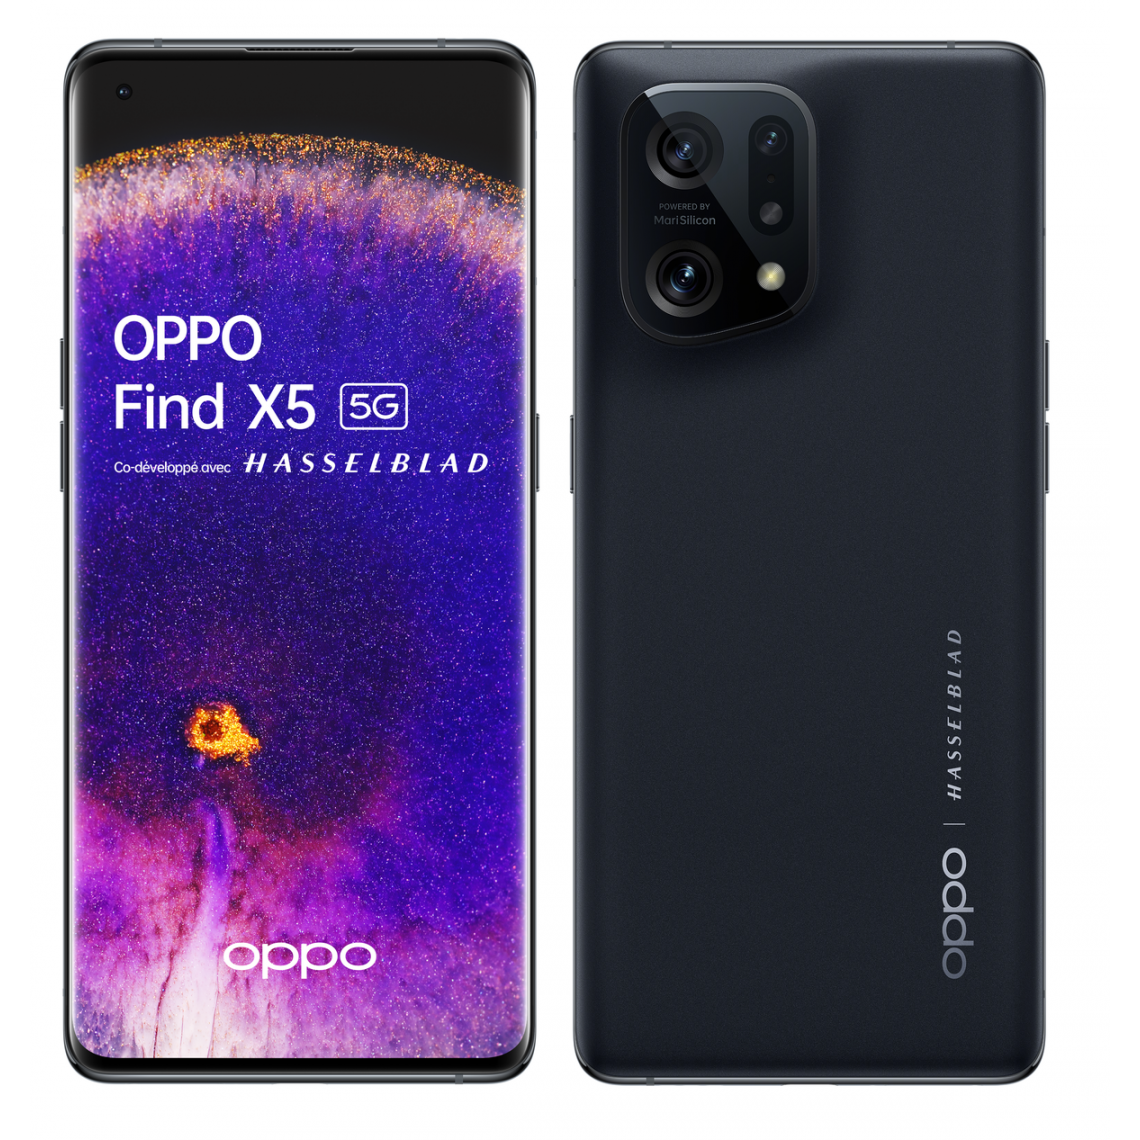 Oppo - FIND X5 - 256 Go - Noir - Smartphone Android